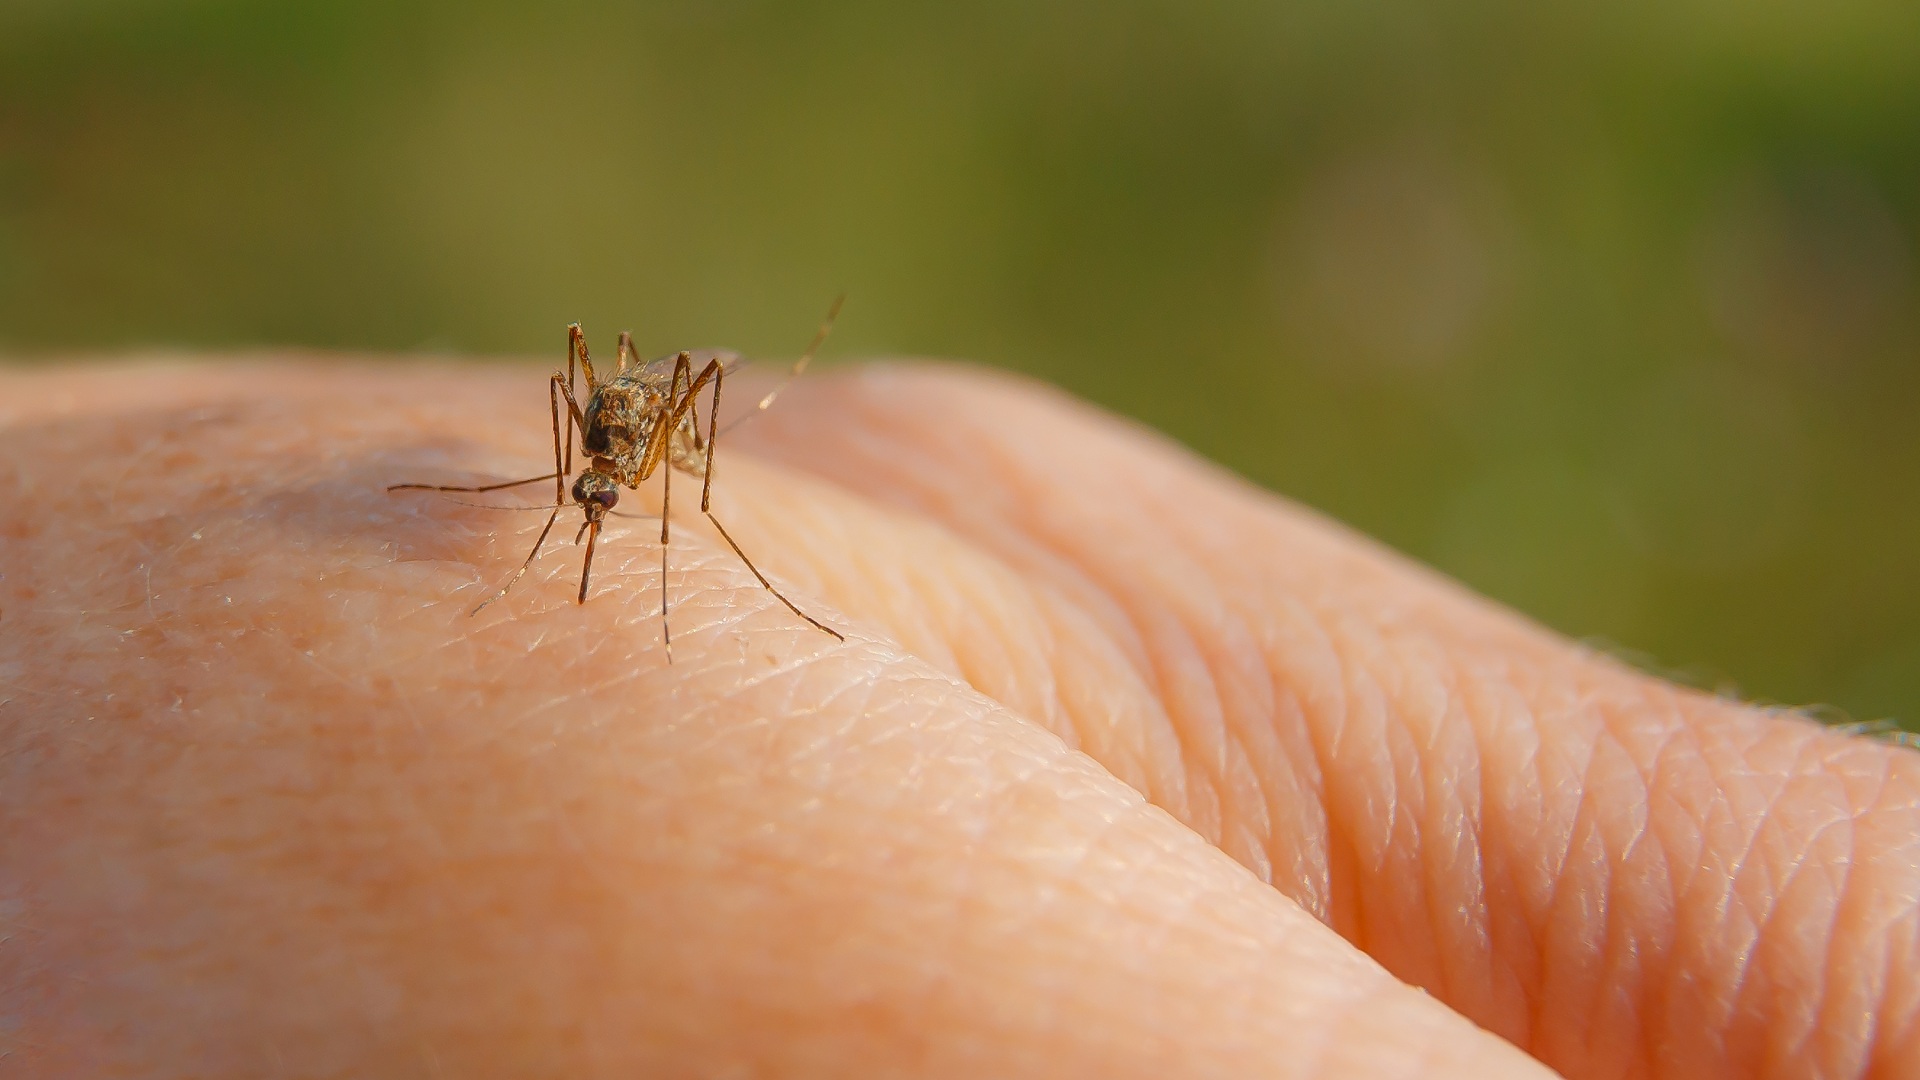 Mosquito Season Is Upon Us - Are You Prepared?